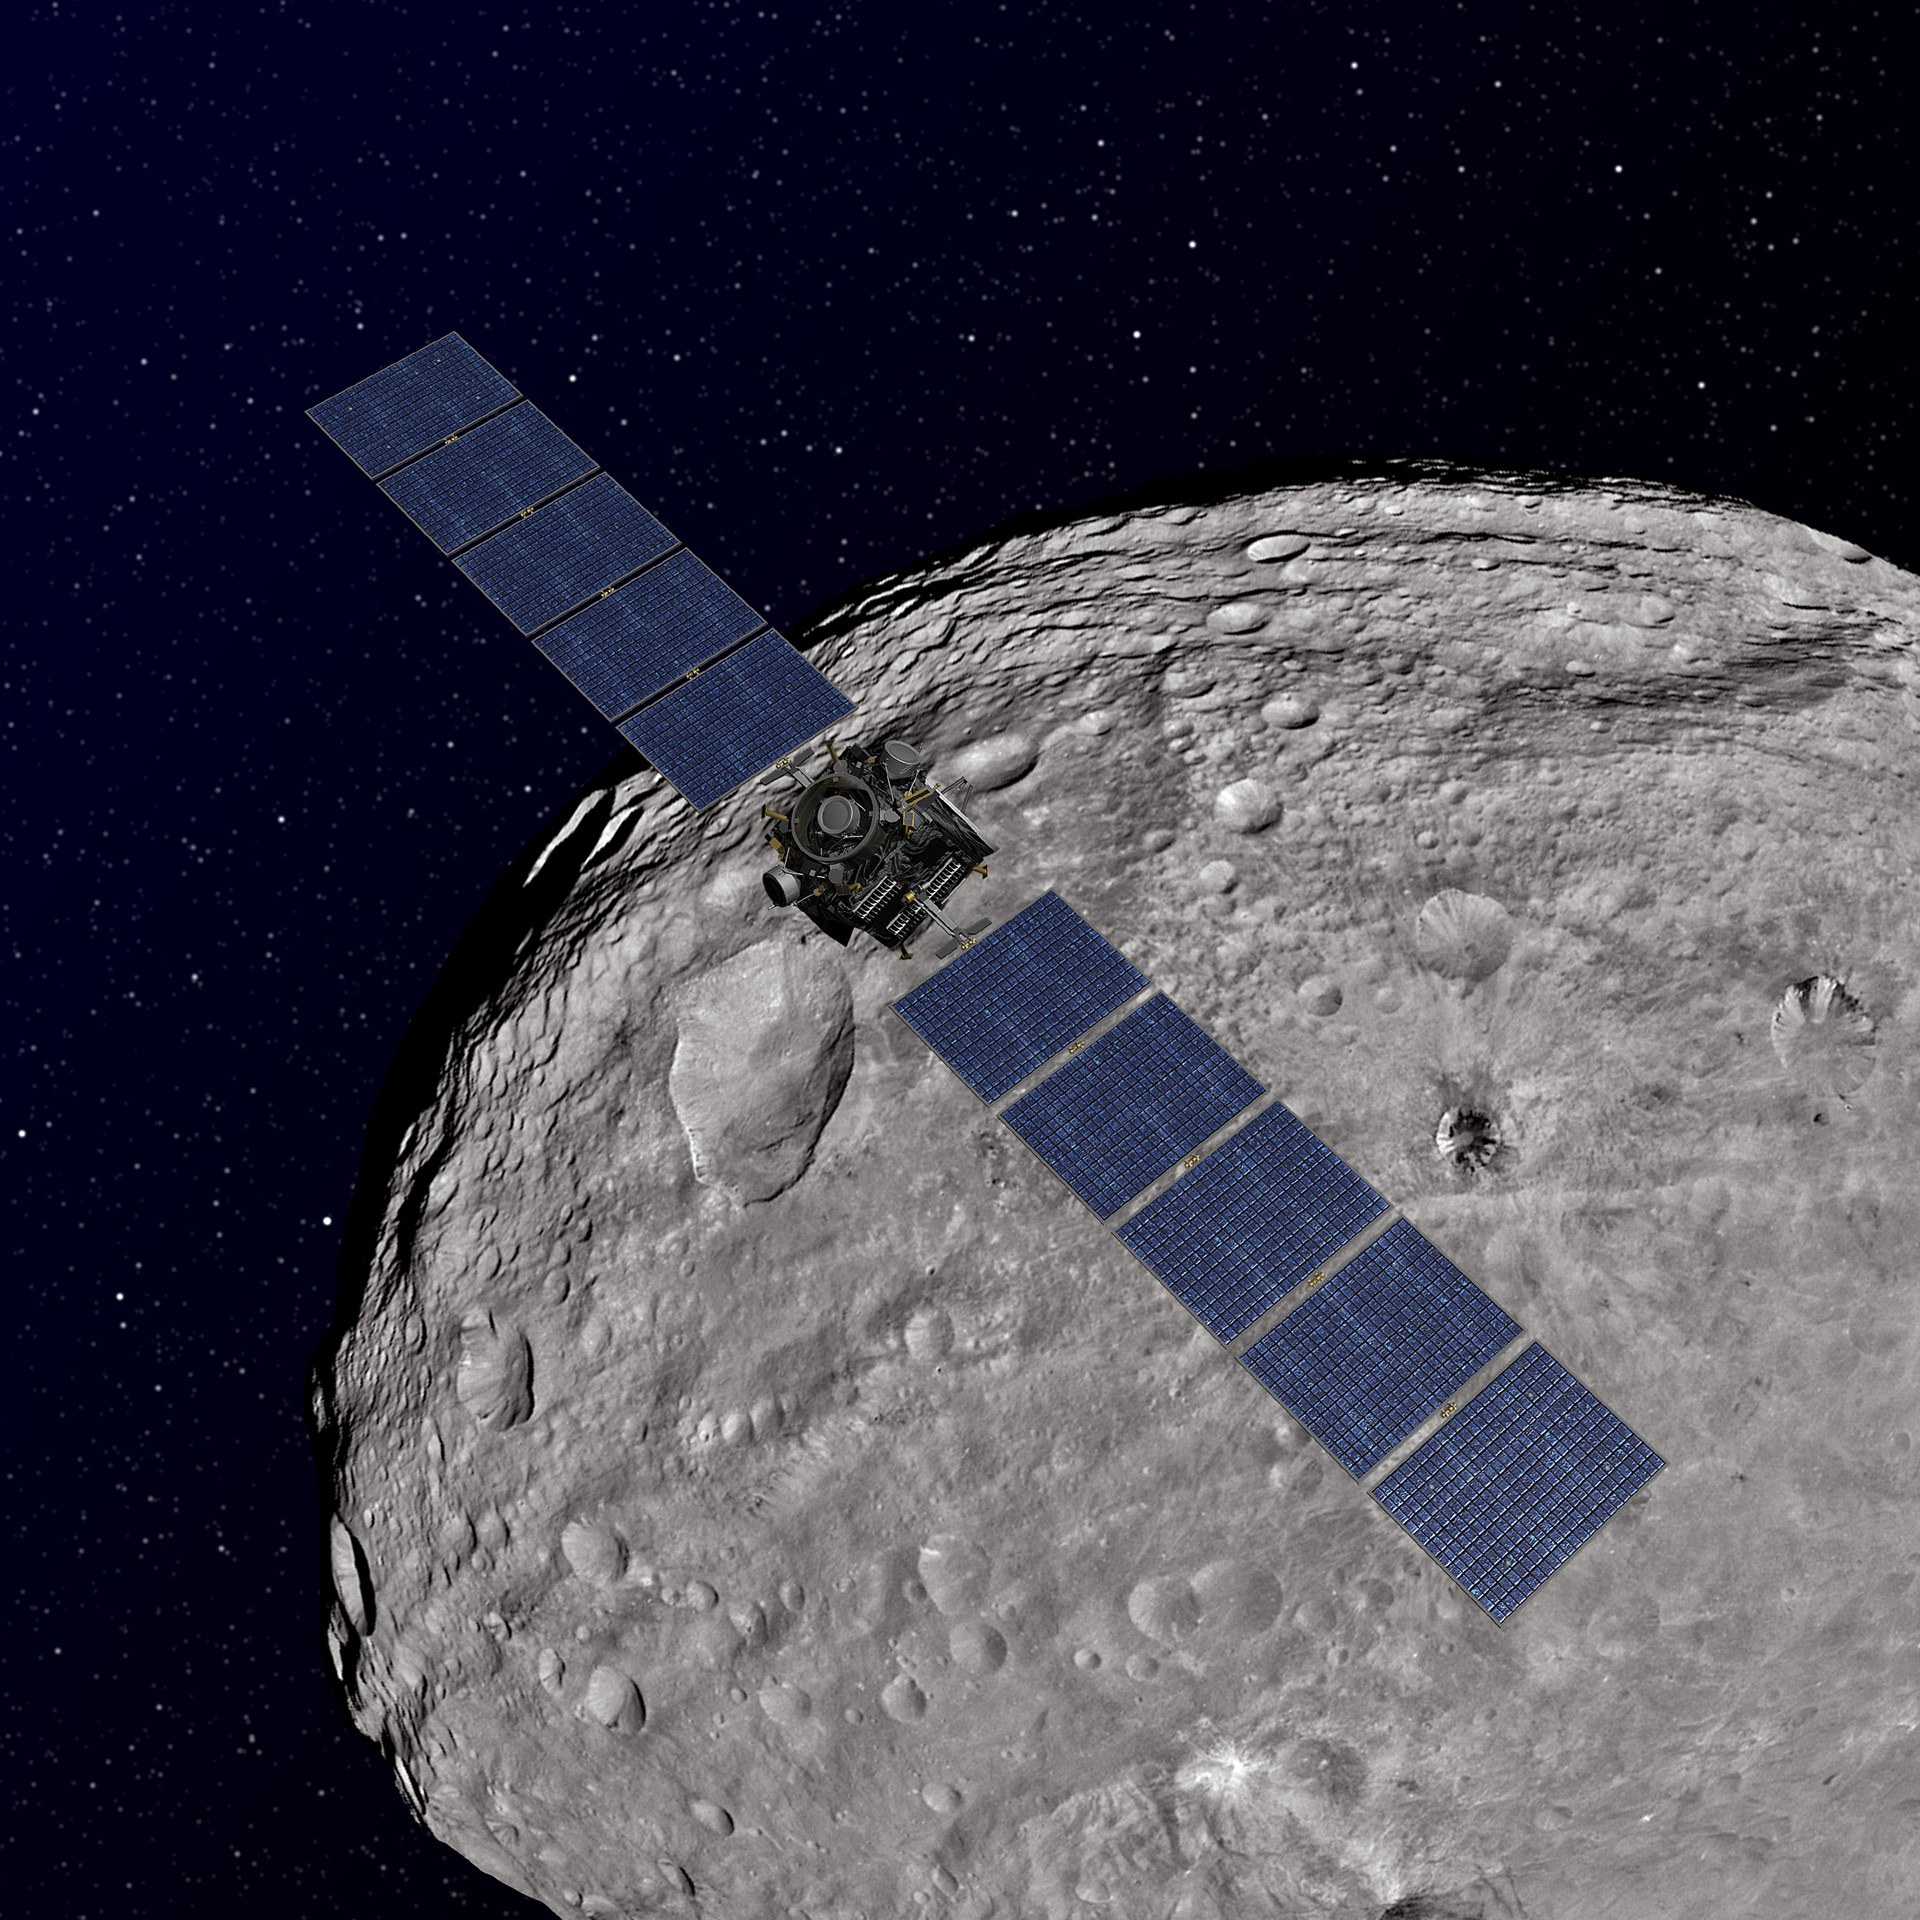 The Dawn mission at the asteroid Vesta